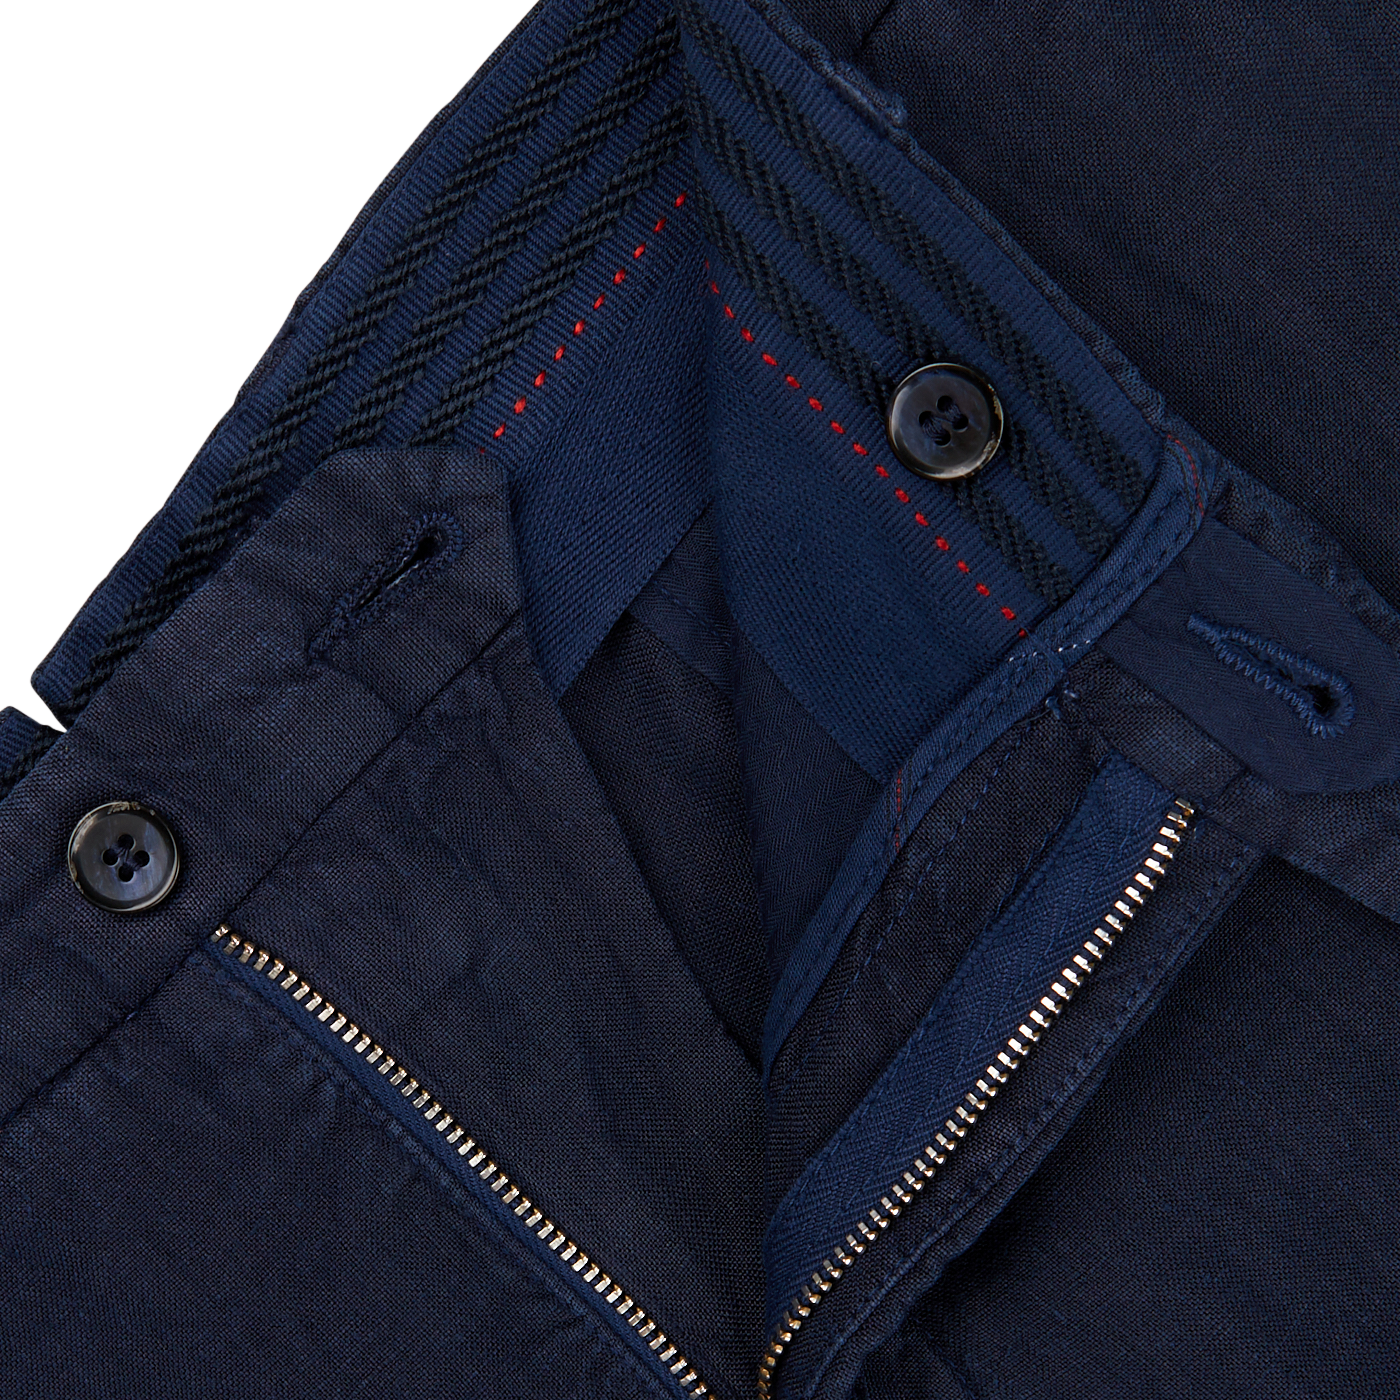 Close-up of a L.B.M. 1911 navy blue washed linen suit with a zipper and buttons, featuring red stitch detailing on the inner seam.